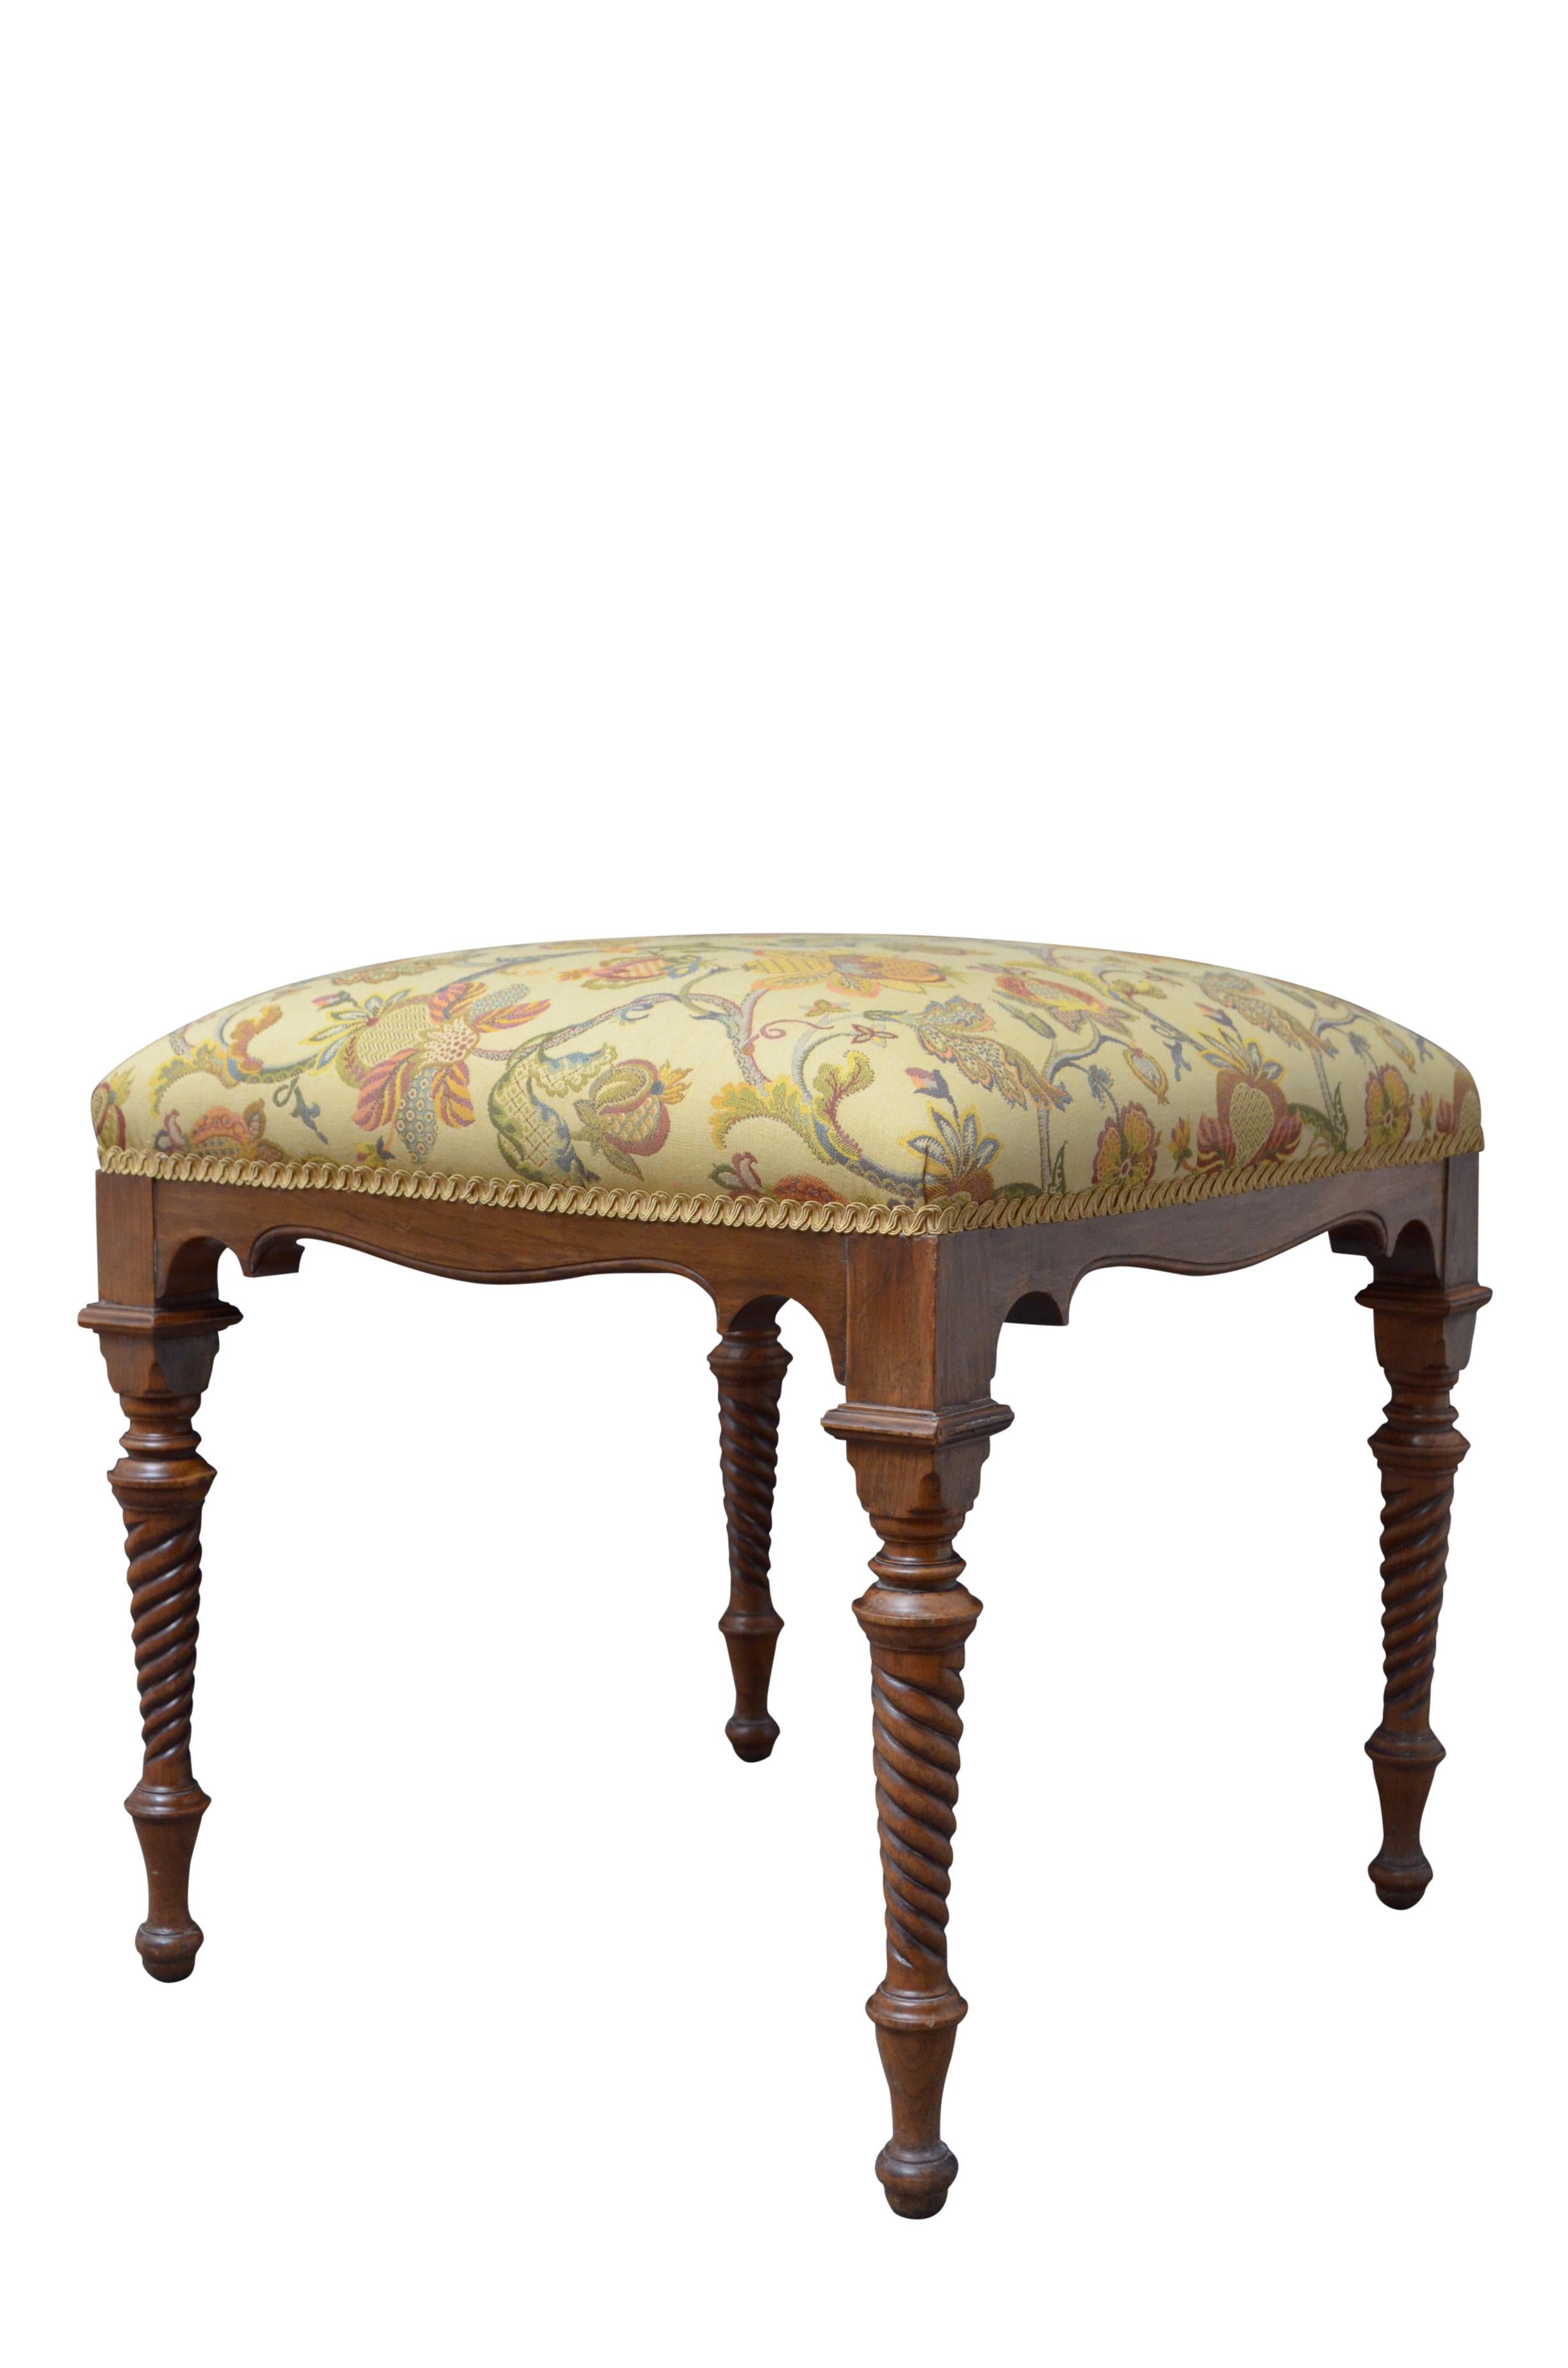 K0463 Superb quality Victorian dressing table stool in walnut, having newly reupholstered seat with attractive top cover above shaped and carved frieze and turned, tapered legs of twisted design terminating in ball feet. This antique stool retains